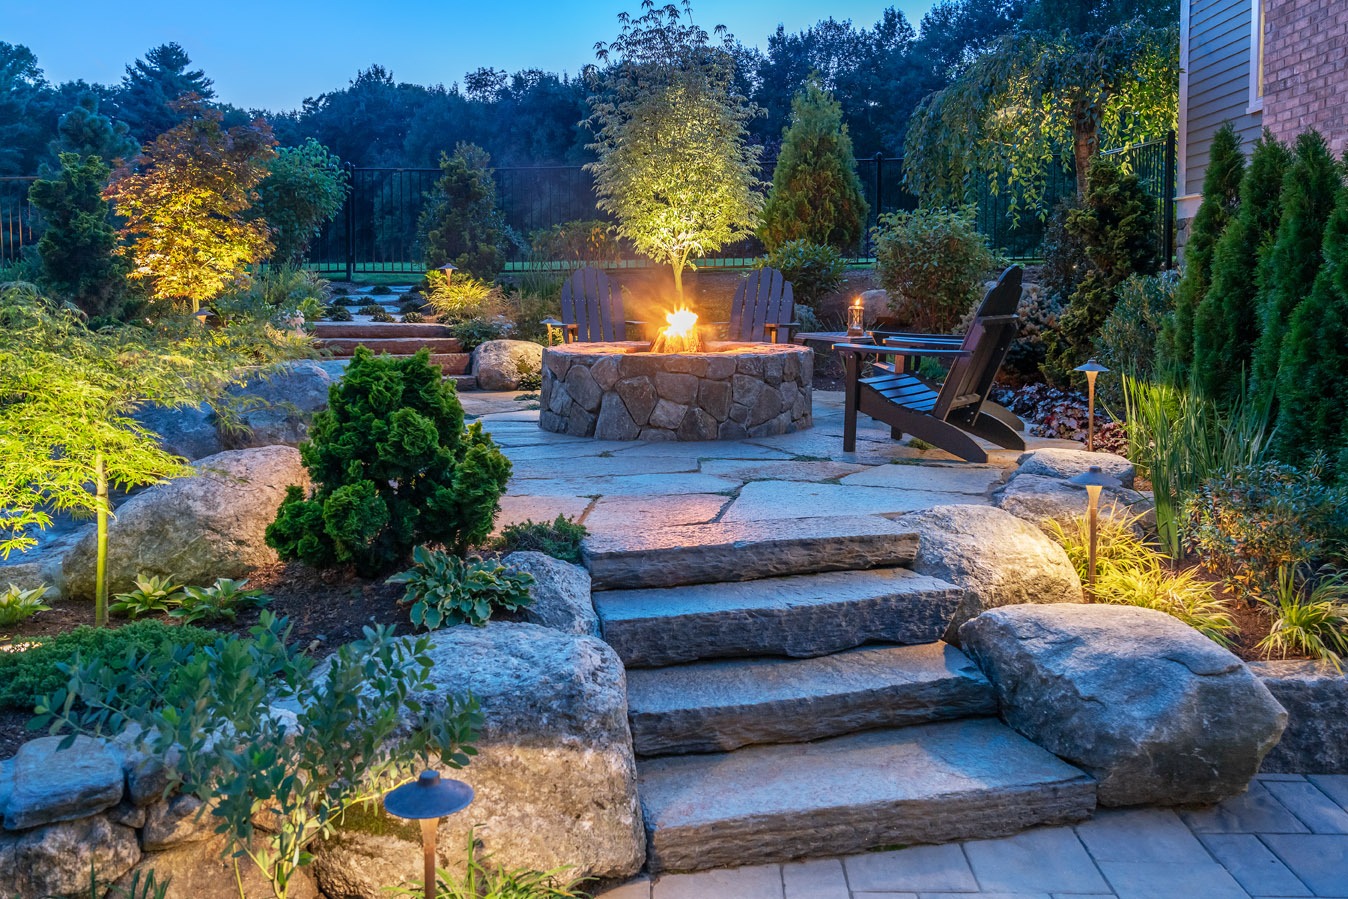 An inviting outdoor space at twilight featuring stone steps, a fire pit, Adirondack chairs, and illuminated landscaping creating a peaceful evening ambiance.